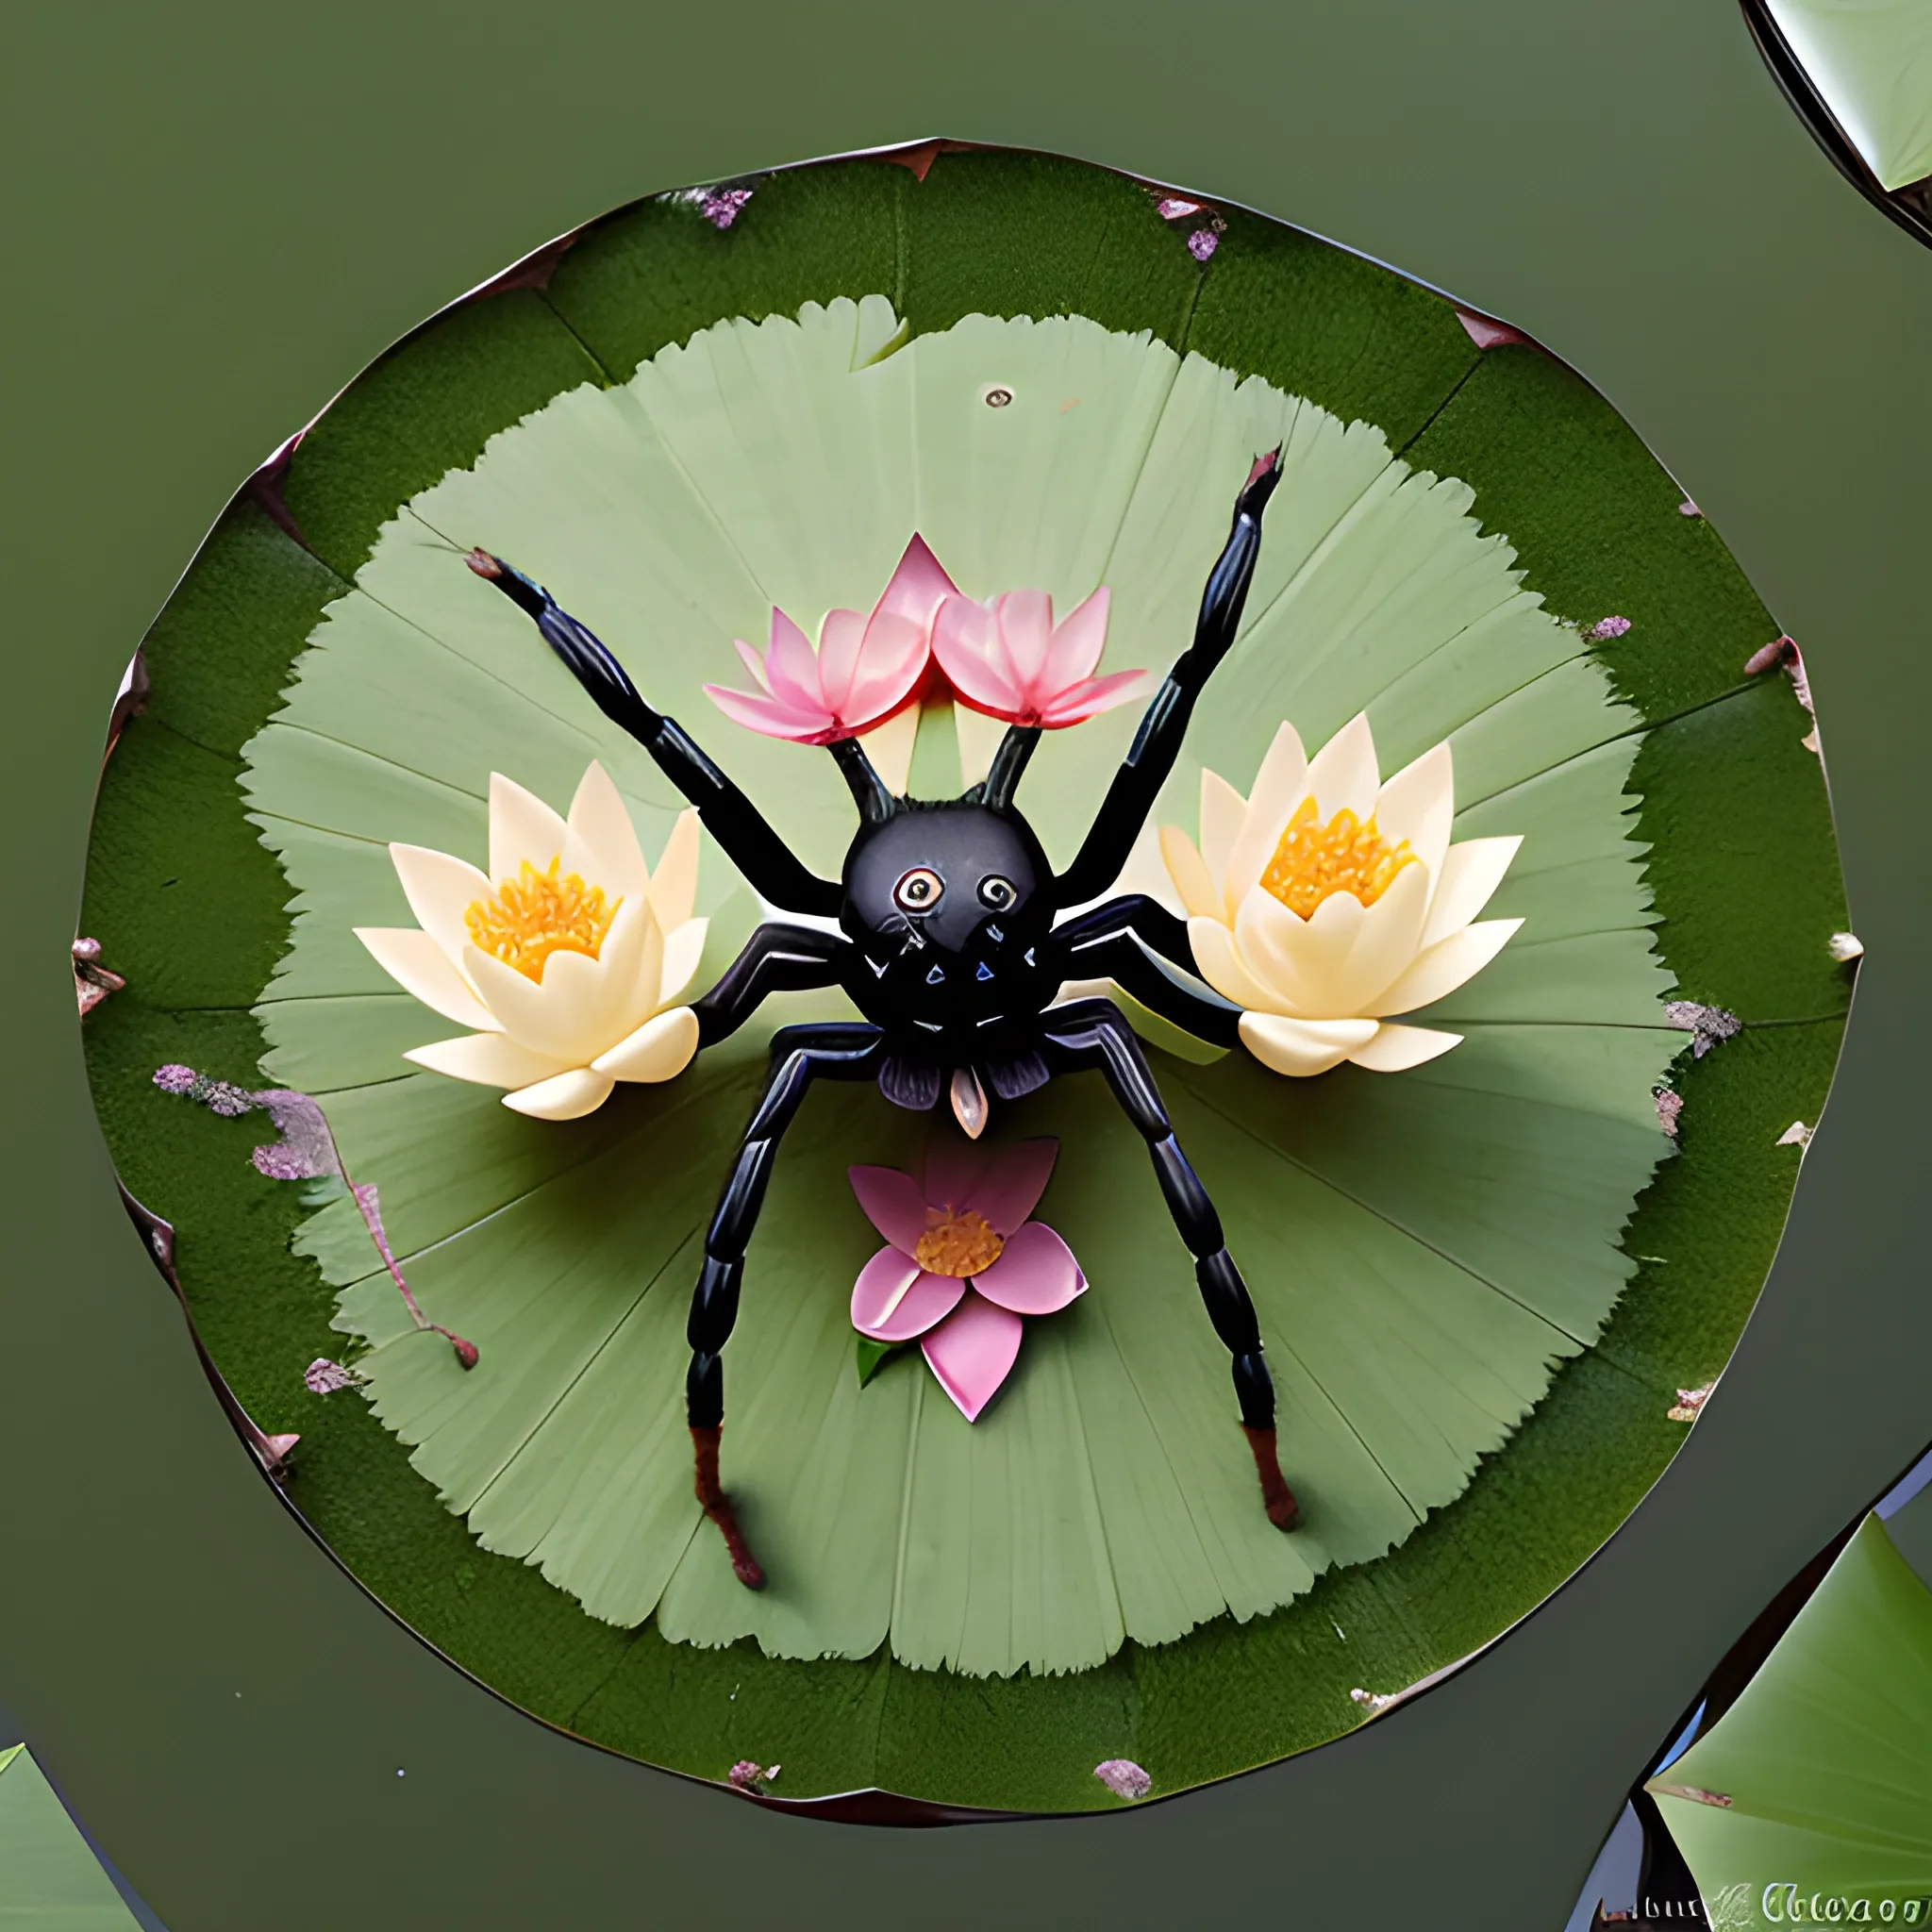 a goddes spider emerging from a lotus flower